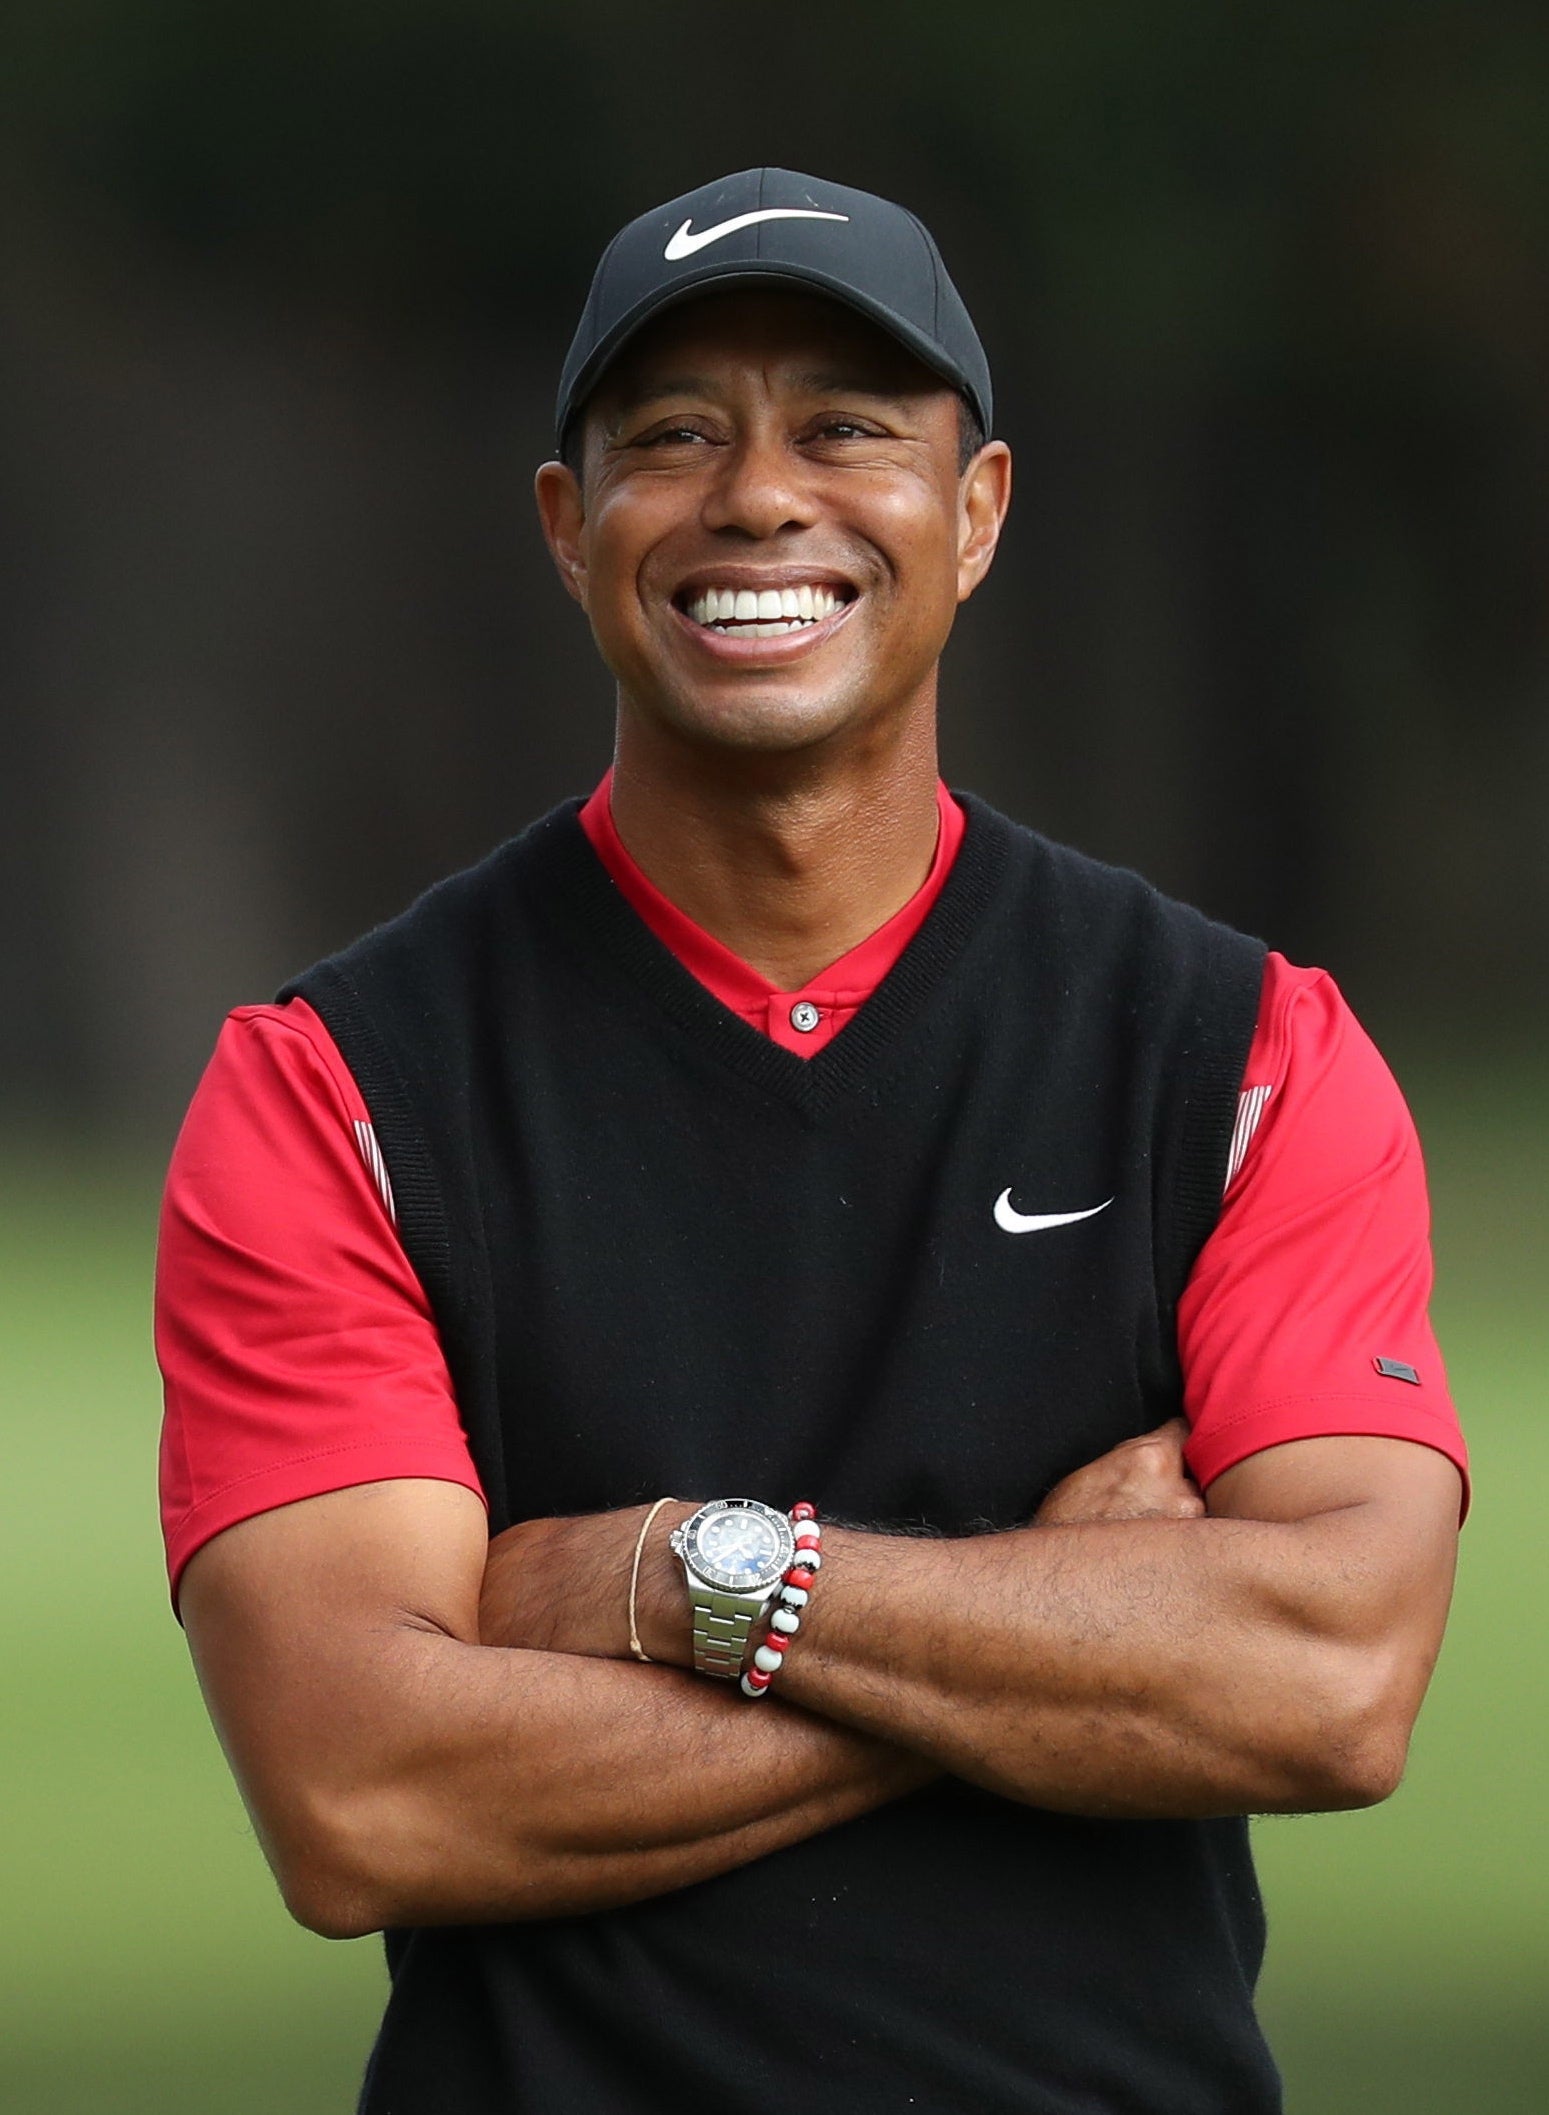 Tiger Woods has picked Patrick Reed to play for Team USA in the Presidents Cup